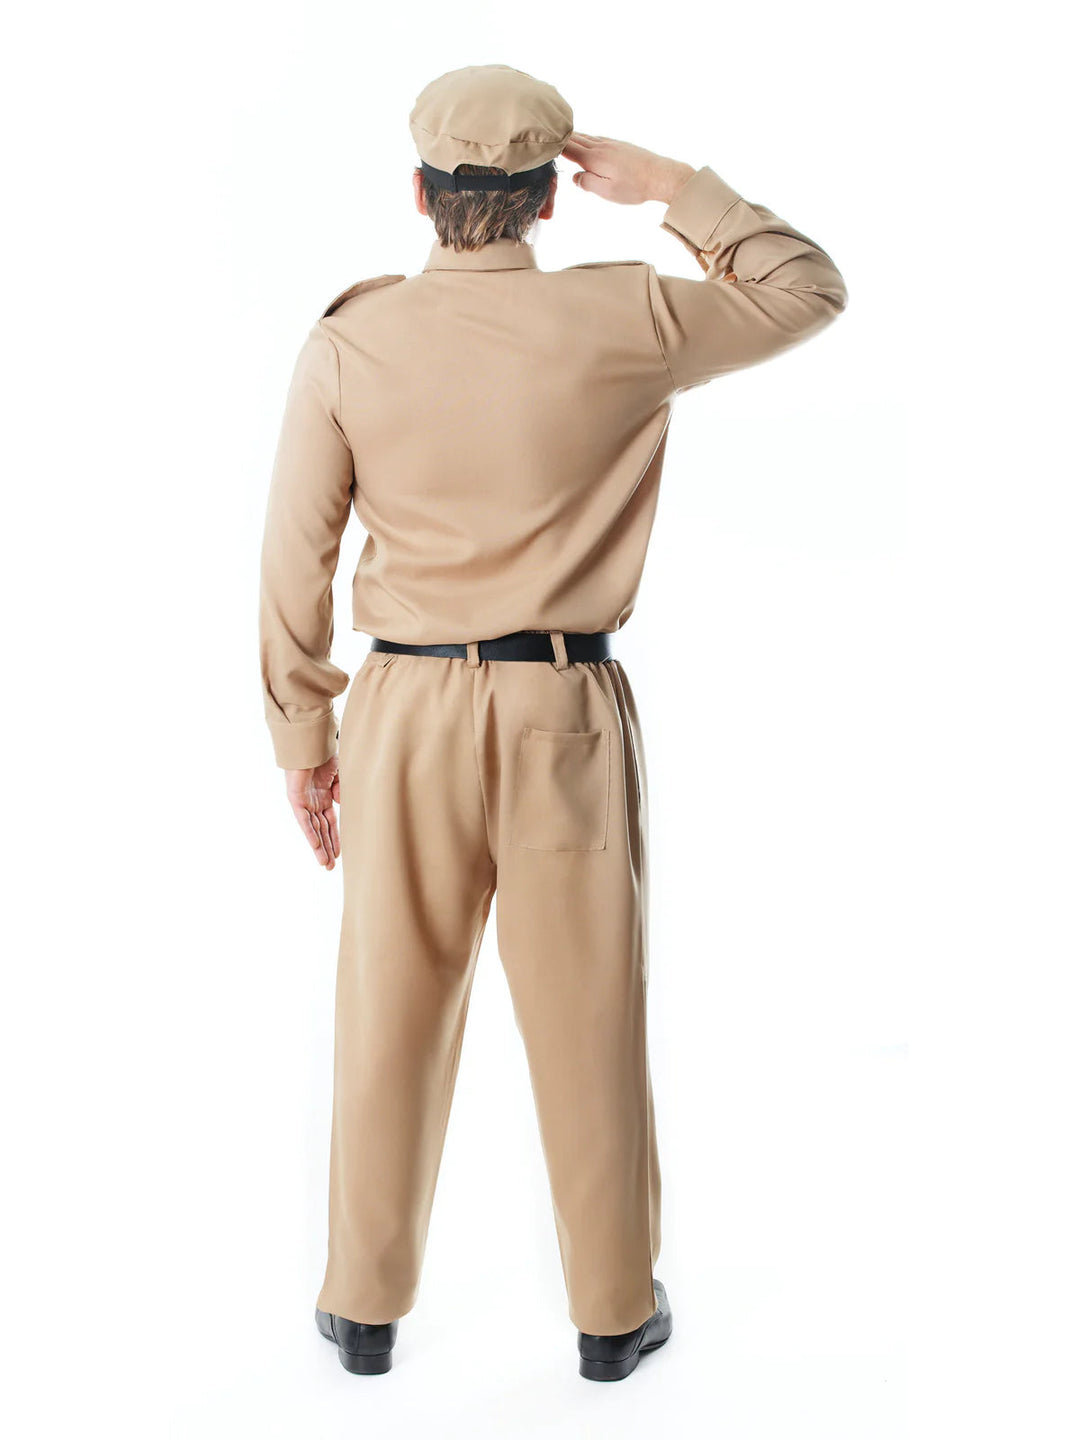 WW2 Army General Adult Costume_3